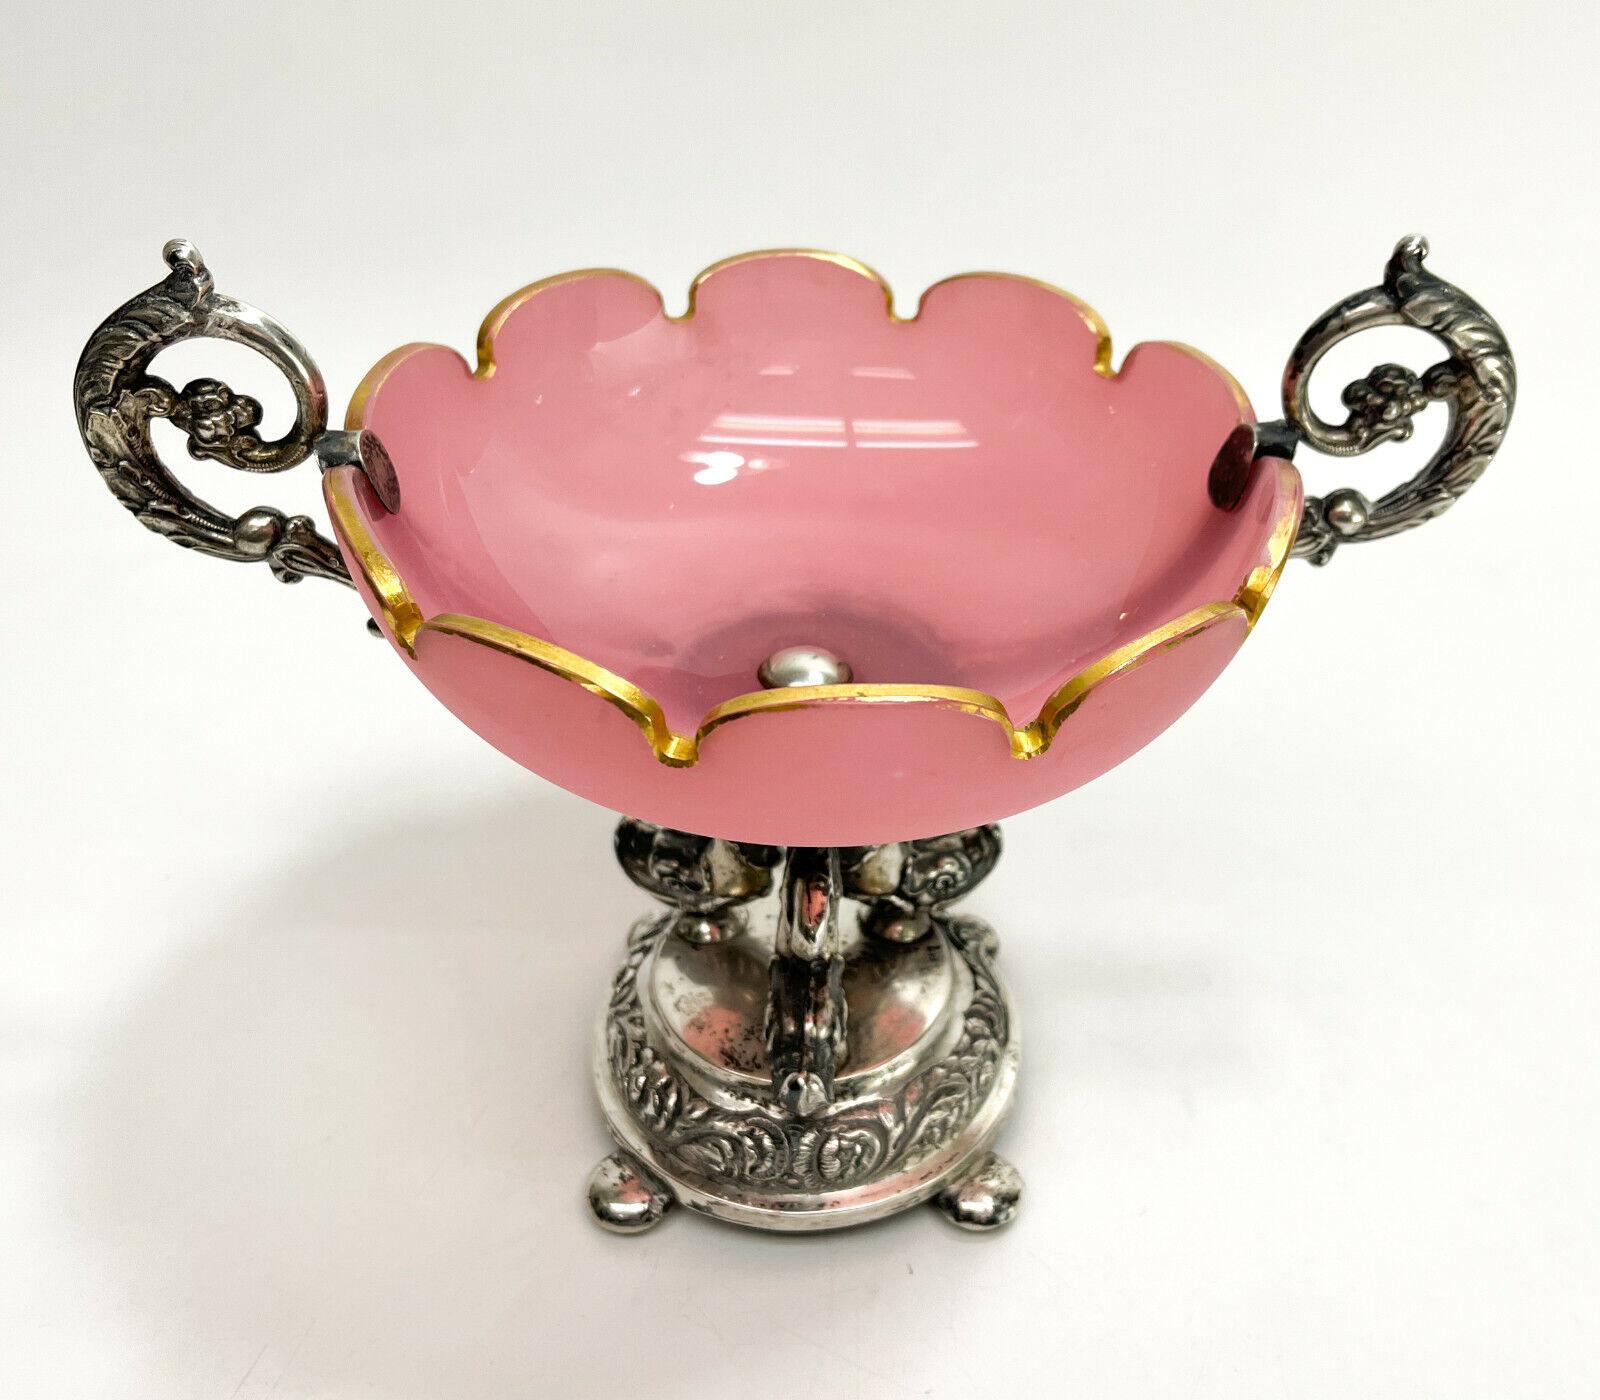 Johann Friedrich August Novack German silver & glass footed bowl, circa 1830

Scalloped pink opaline bowl with figural dolphin to the base. Assay marks to the base. 2nd half 20th Century.

Additional Information:
Age: 19th Century 
Material: